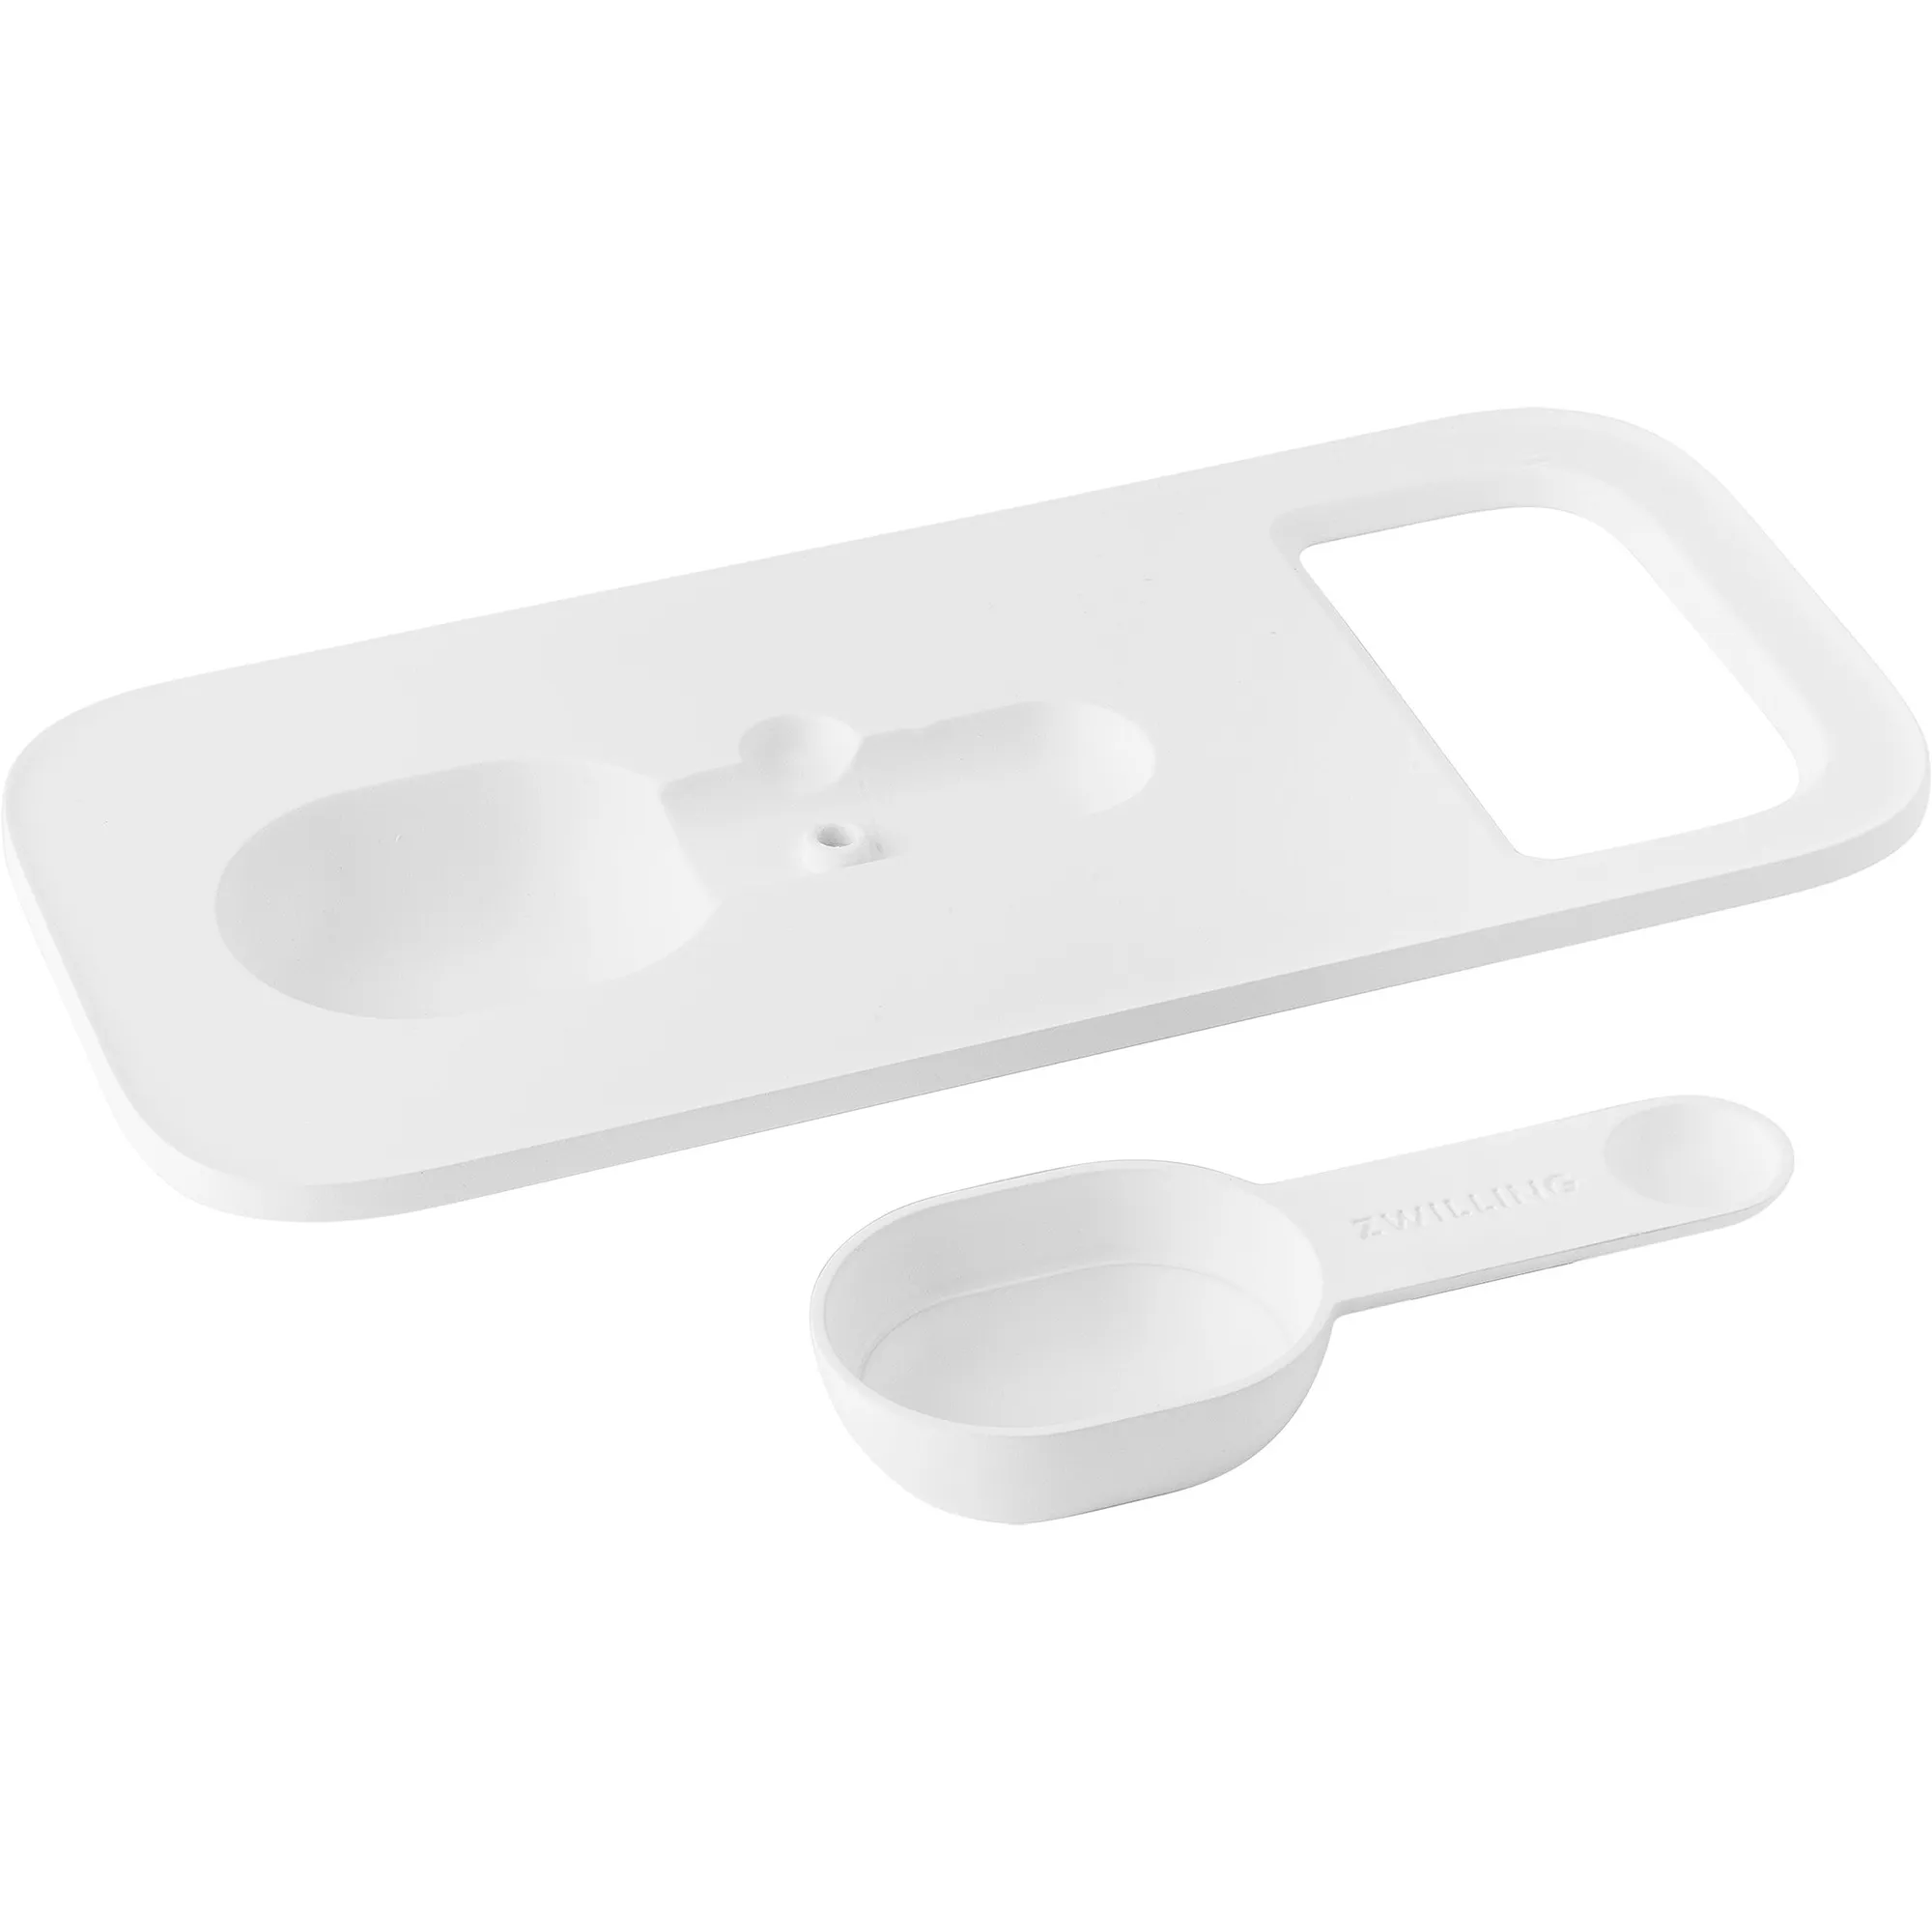 https://www.homethreads.com/files/zwilling/1025335-zwilling-fresh-save-cube-insert-with-measuring-spoon-medium-2.webp